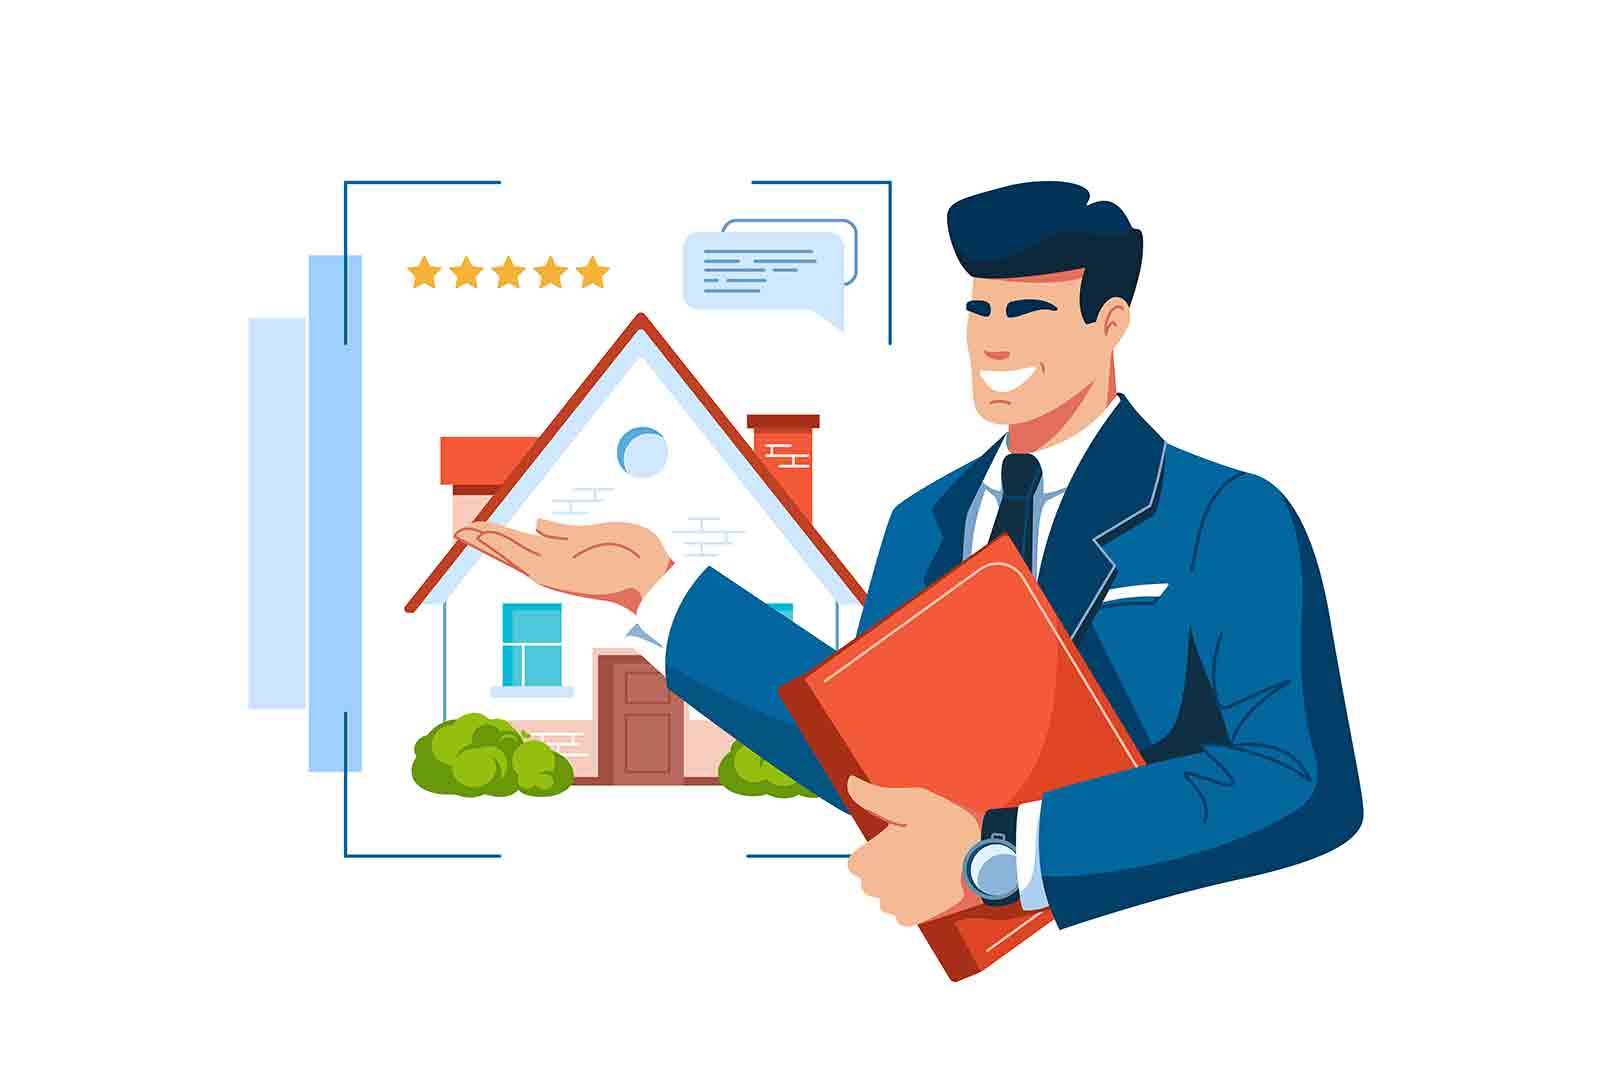 Smiling man realtor worker sell elite houses vector illustration. Present luxury new building flat style. Real estate, accommodation concept